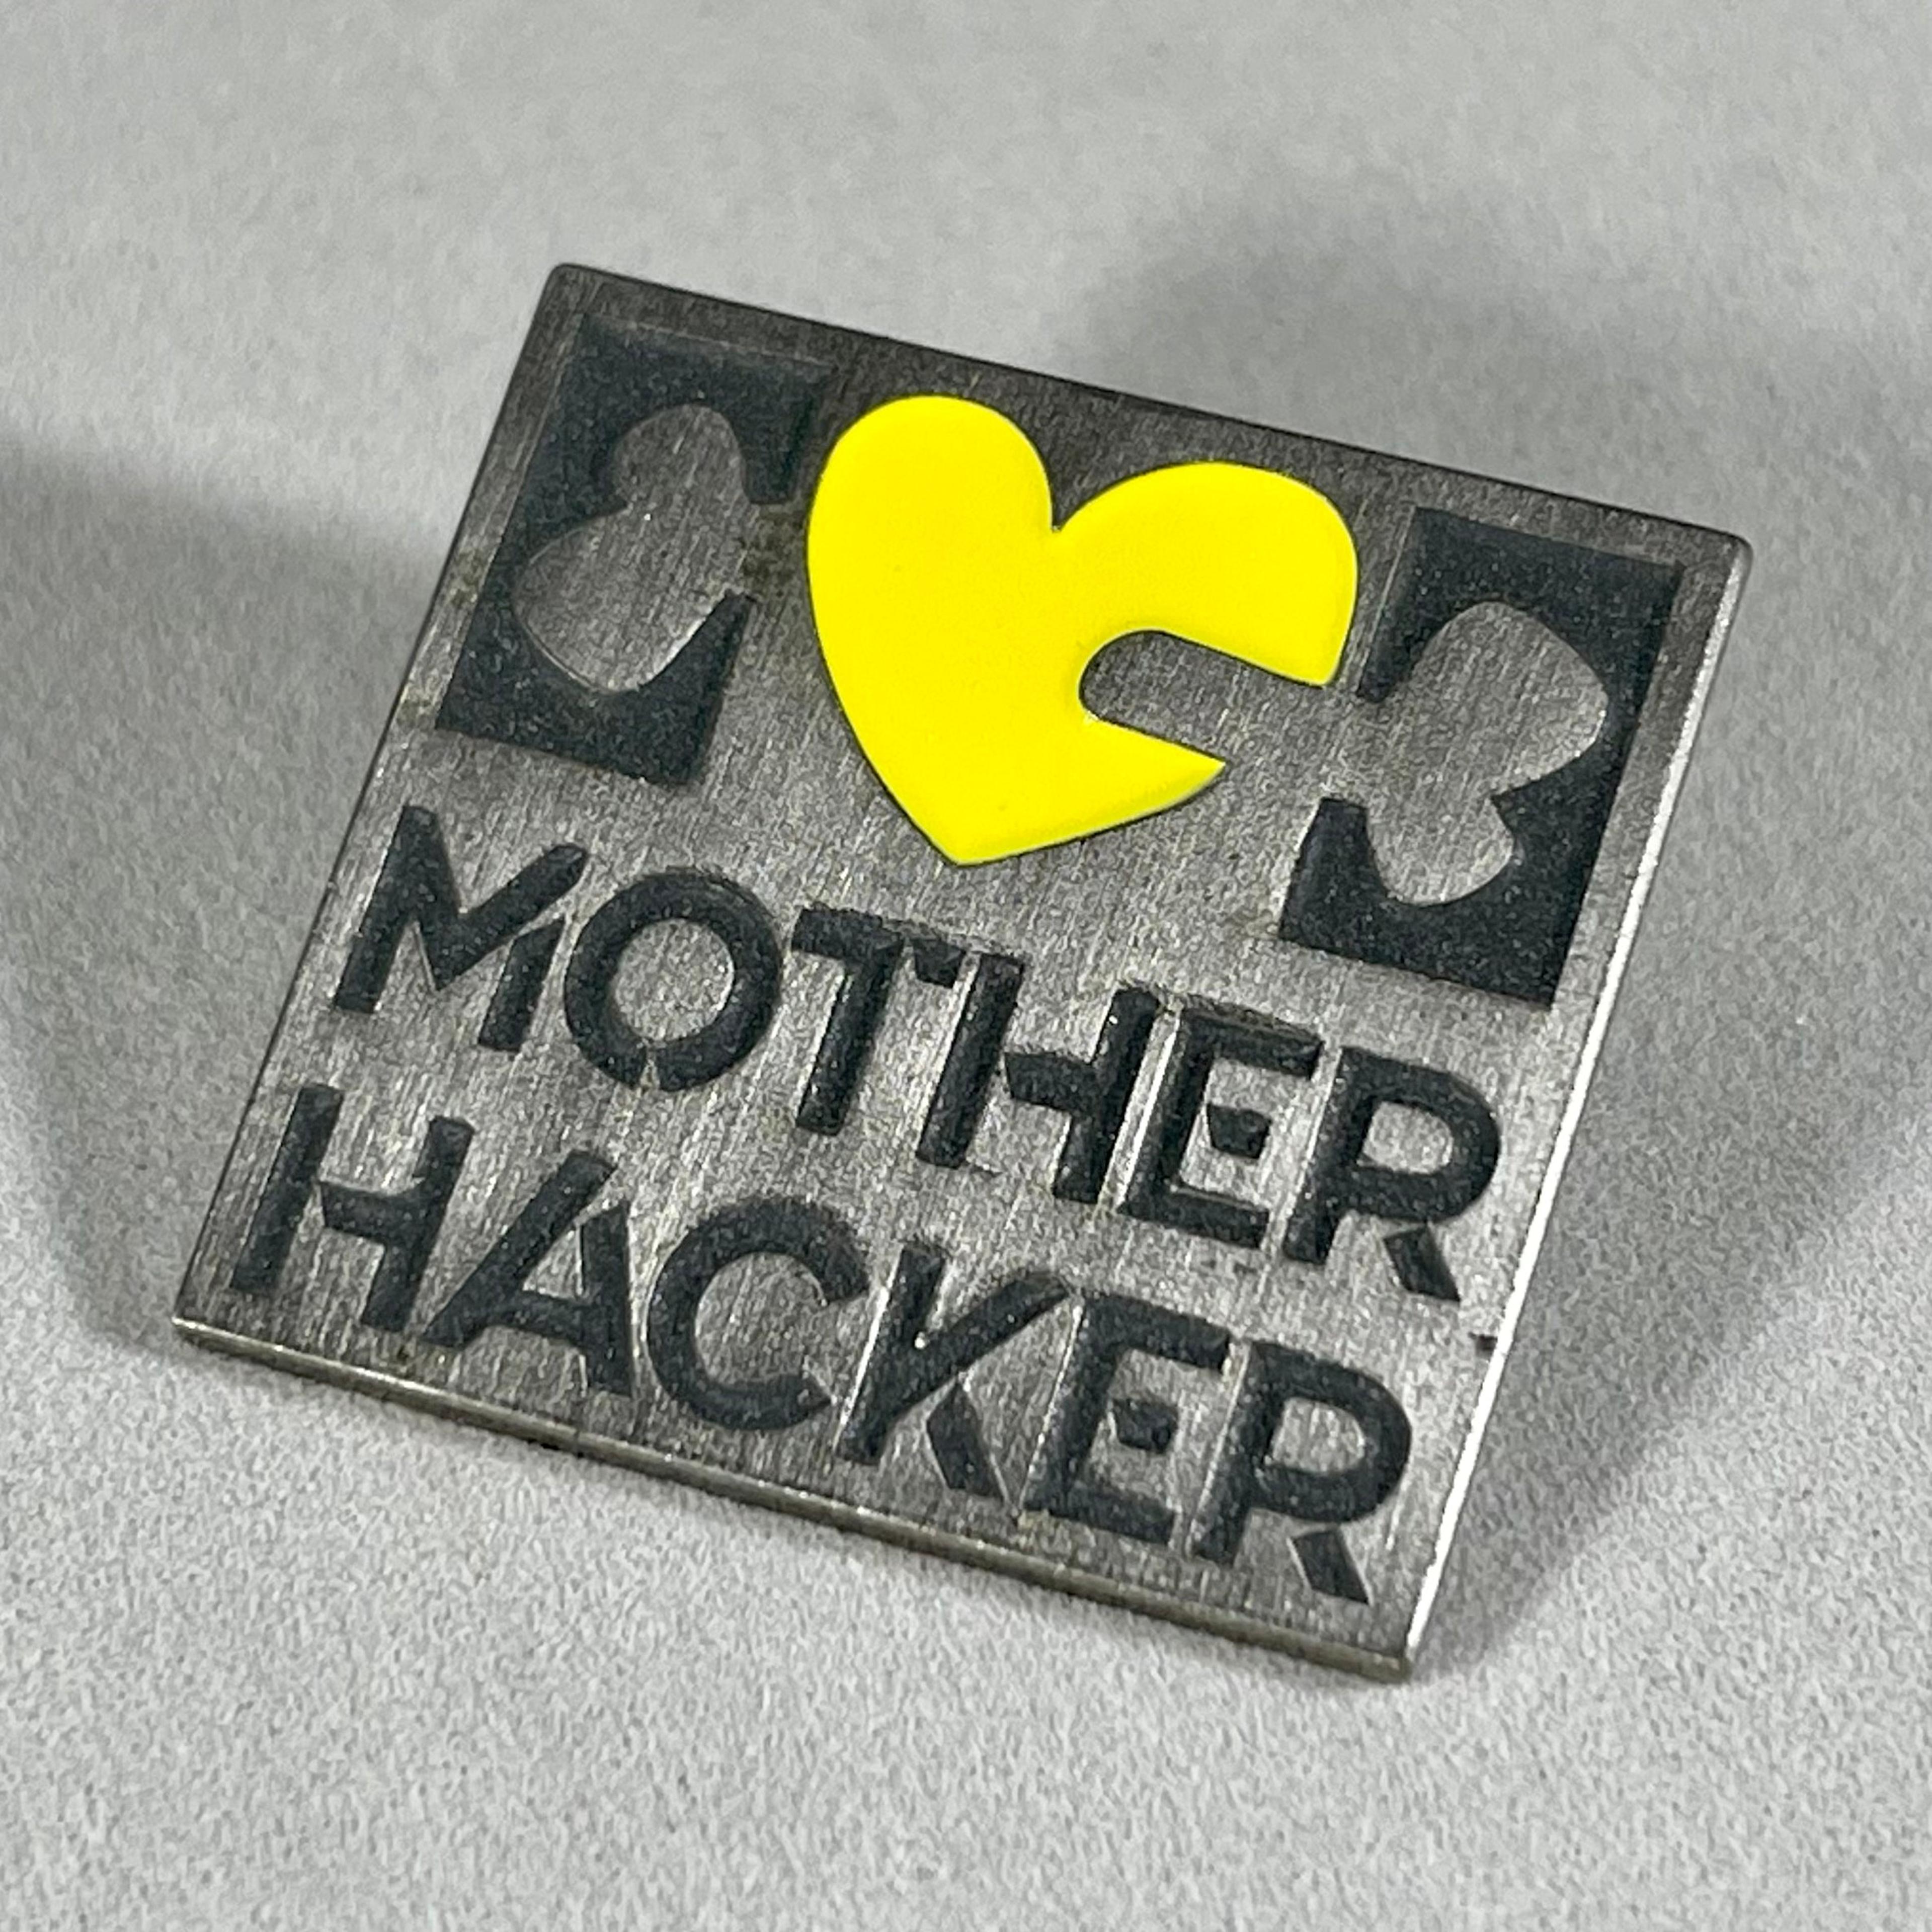 03 - Motherhacker Haters Club Membership (Comes with a Pin)